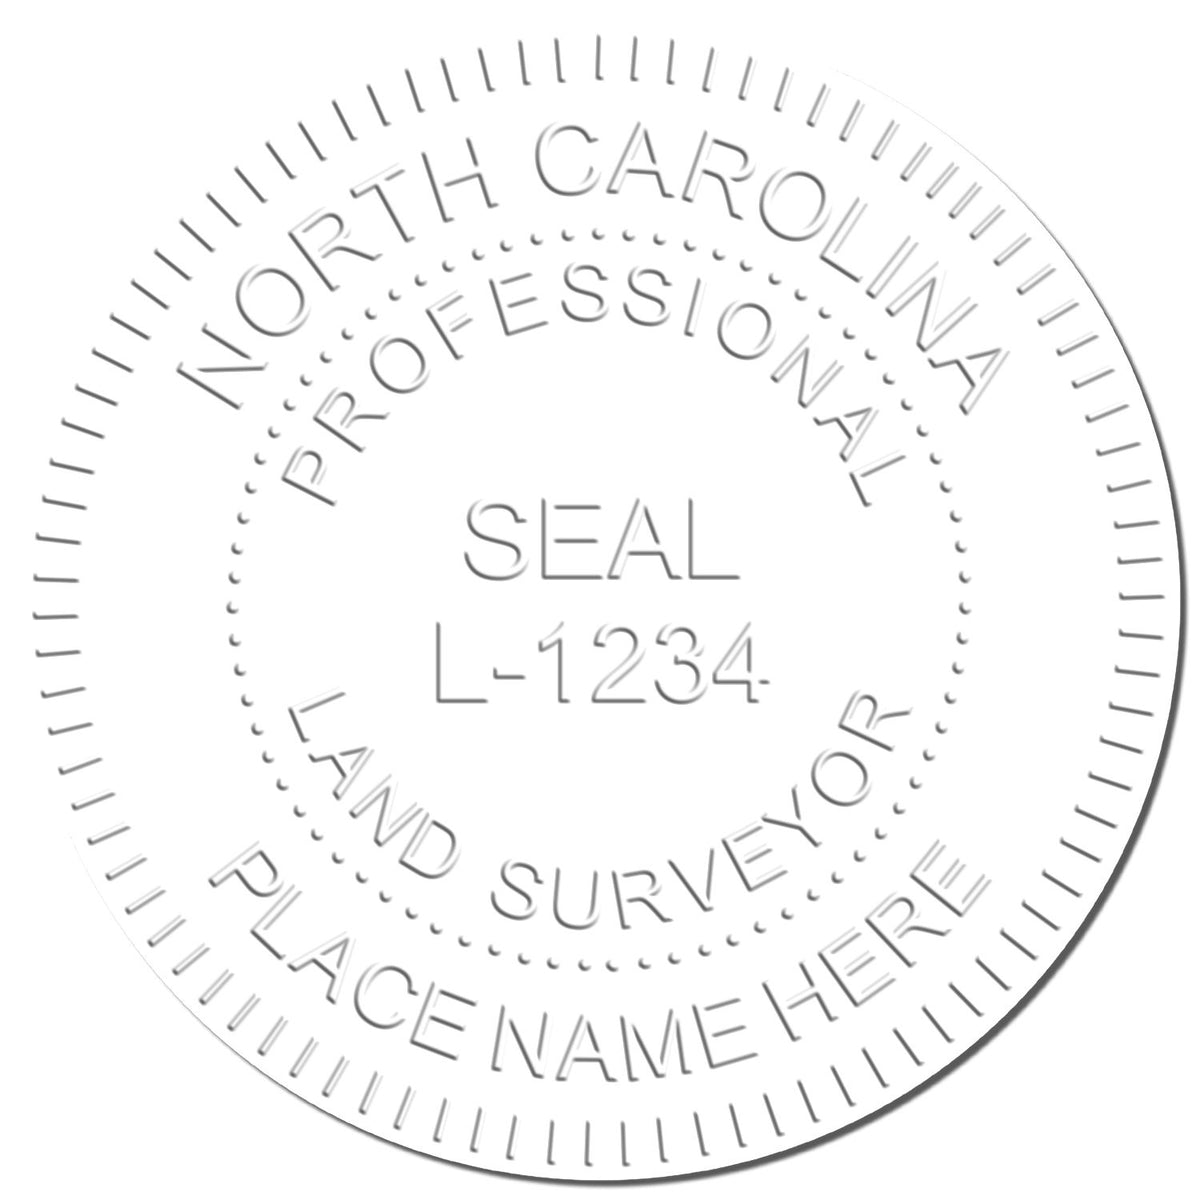 This paper is stamped with a sample imprint of the Gift North Carolina Land Surveyor Seal, signifying its quality and reliability.